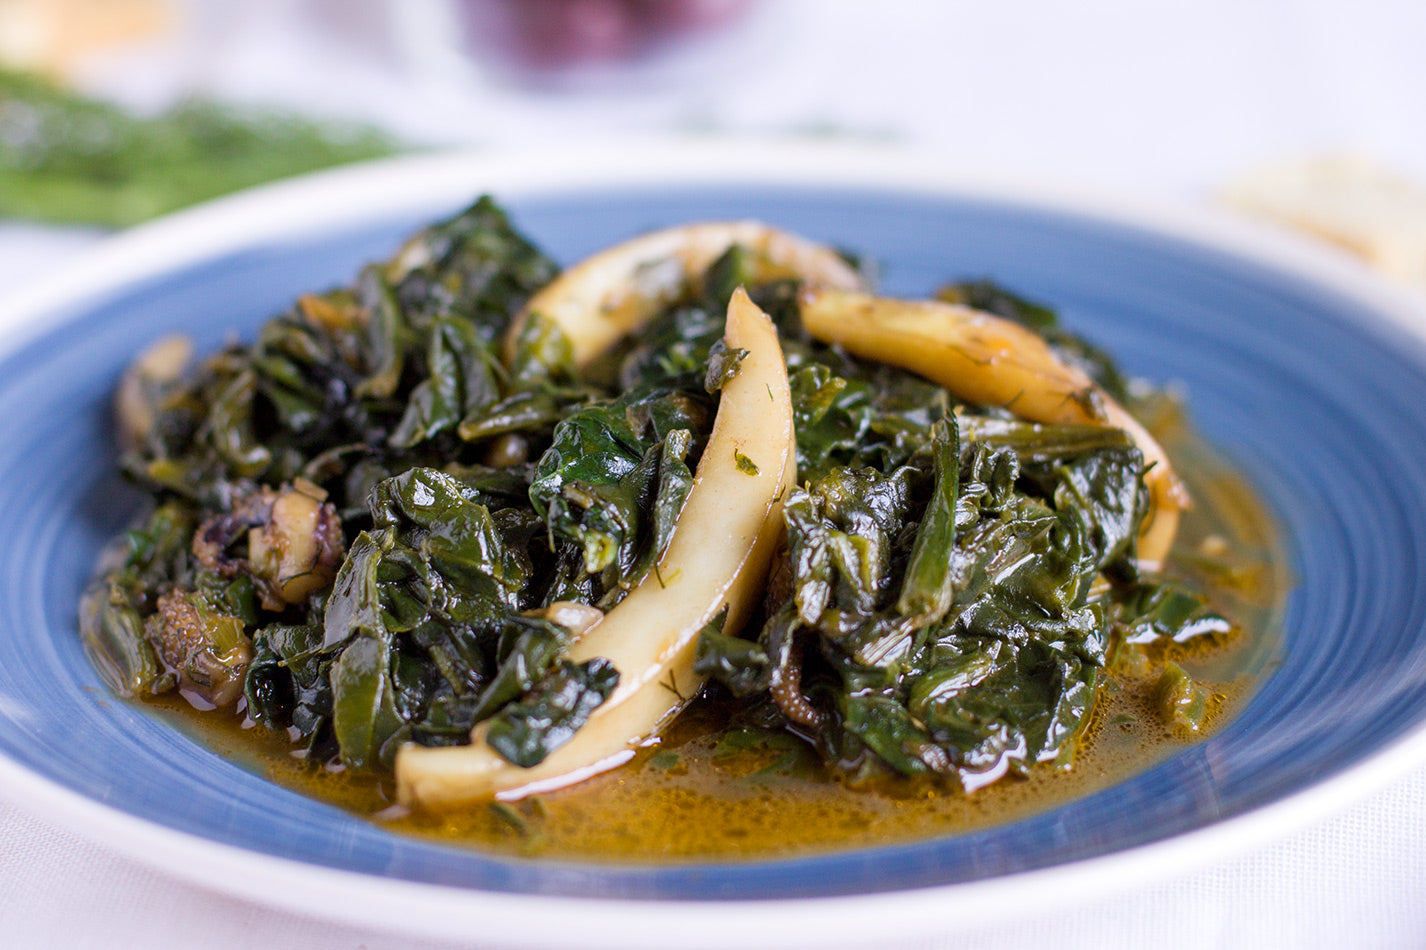 Cuttlefish with spinach in Paros